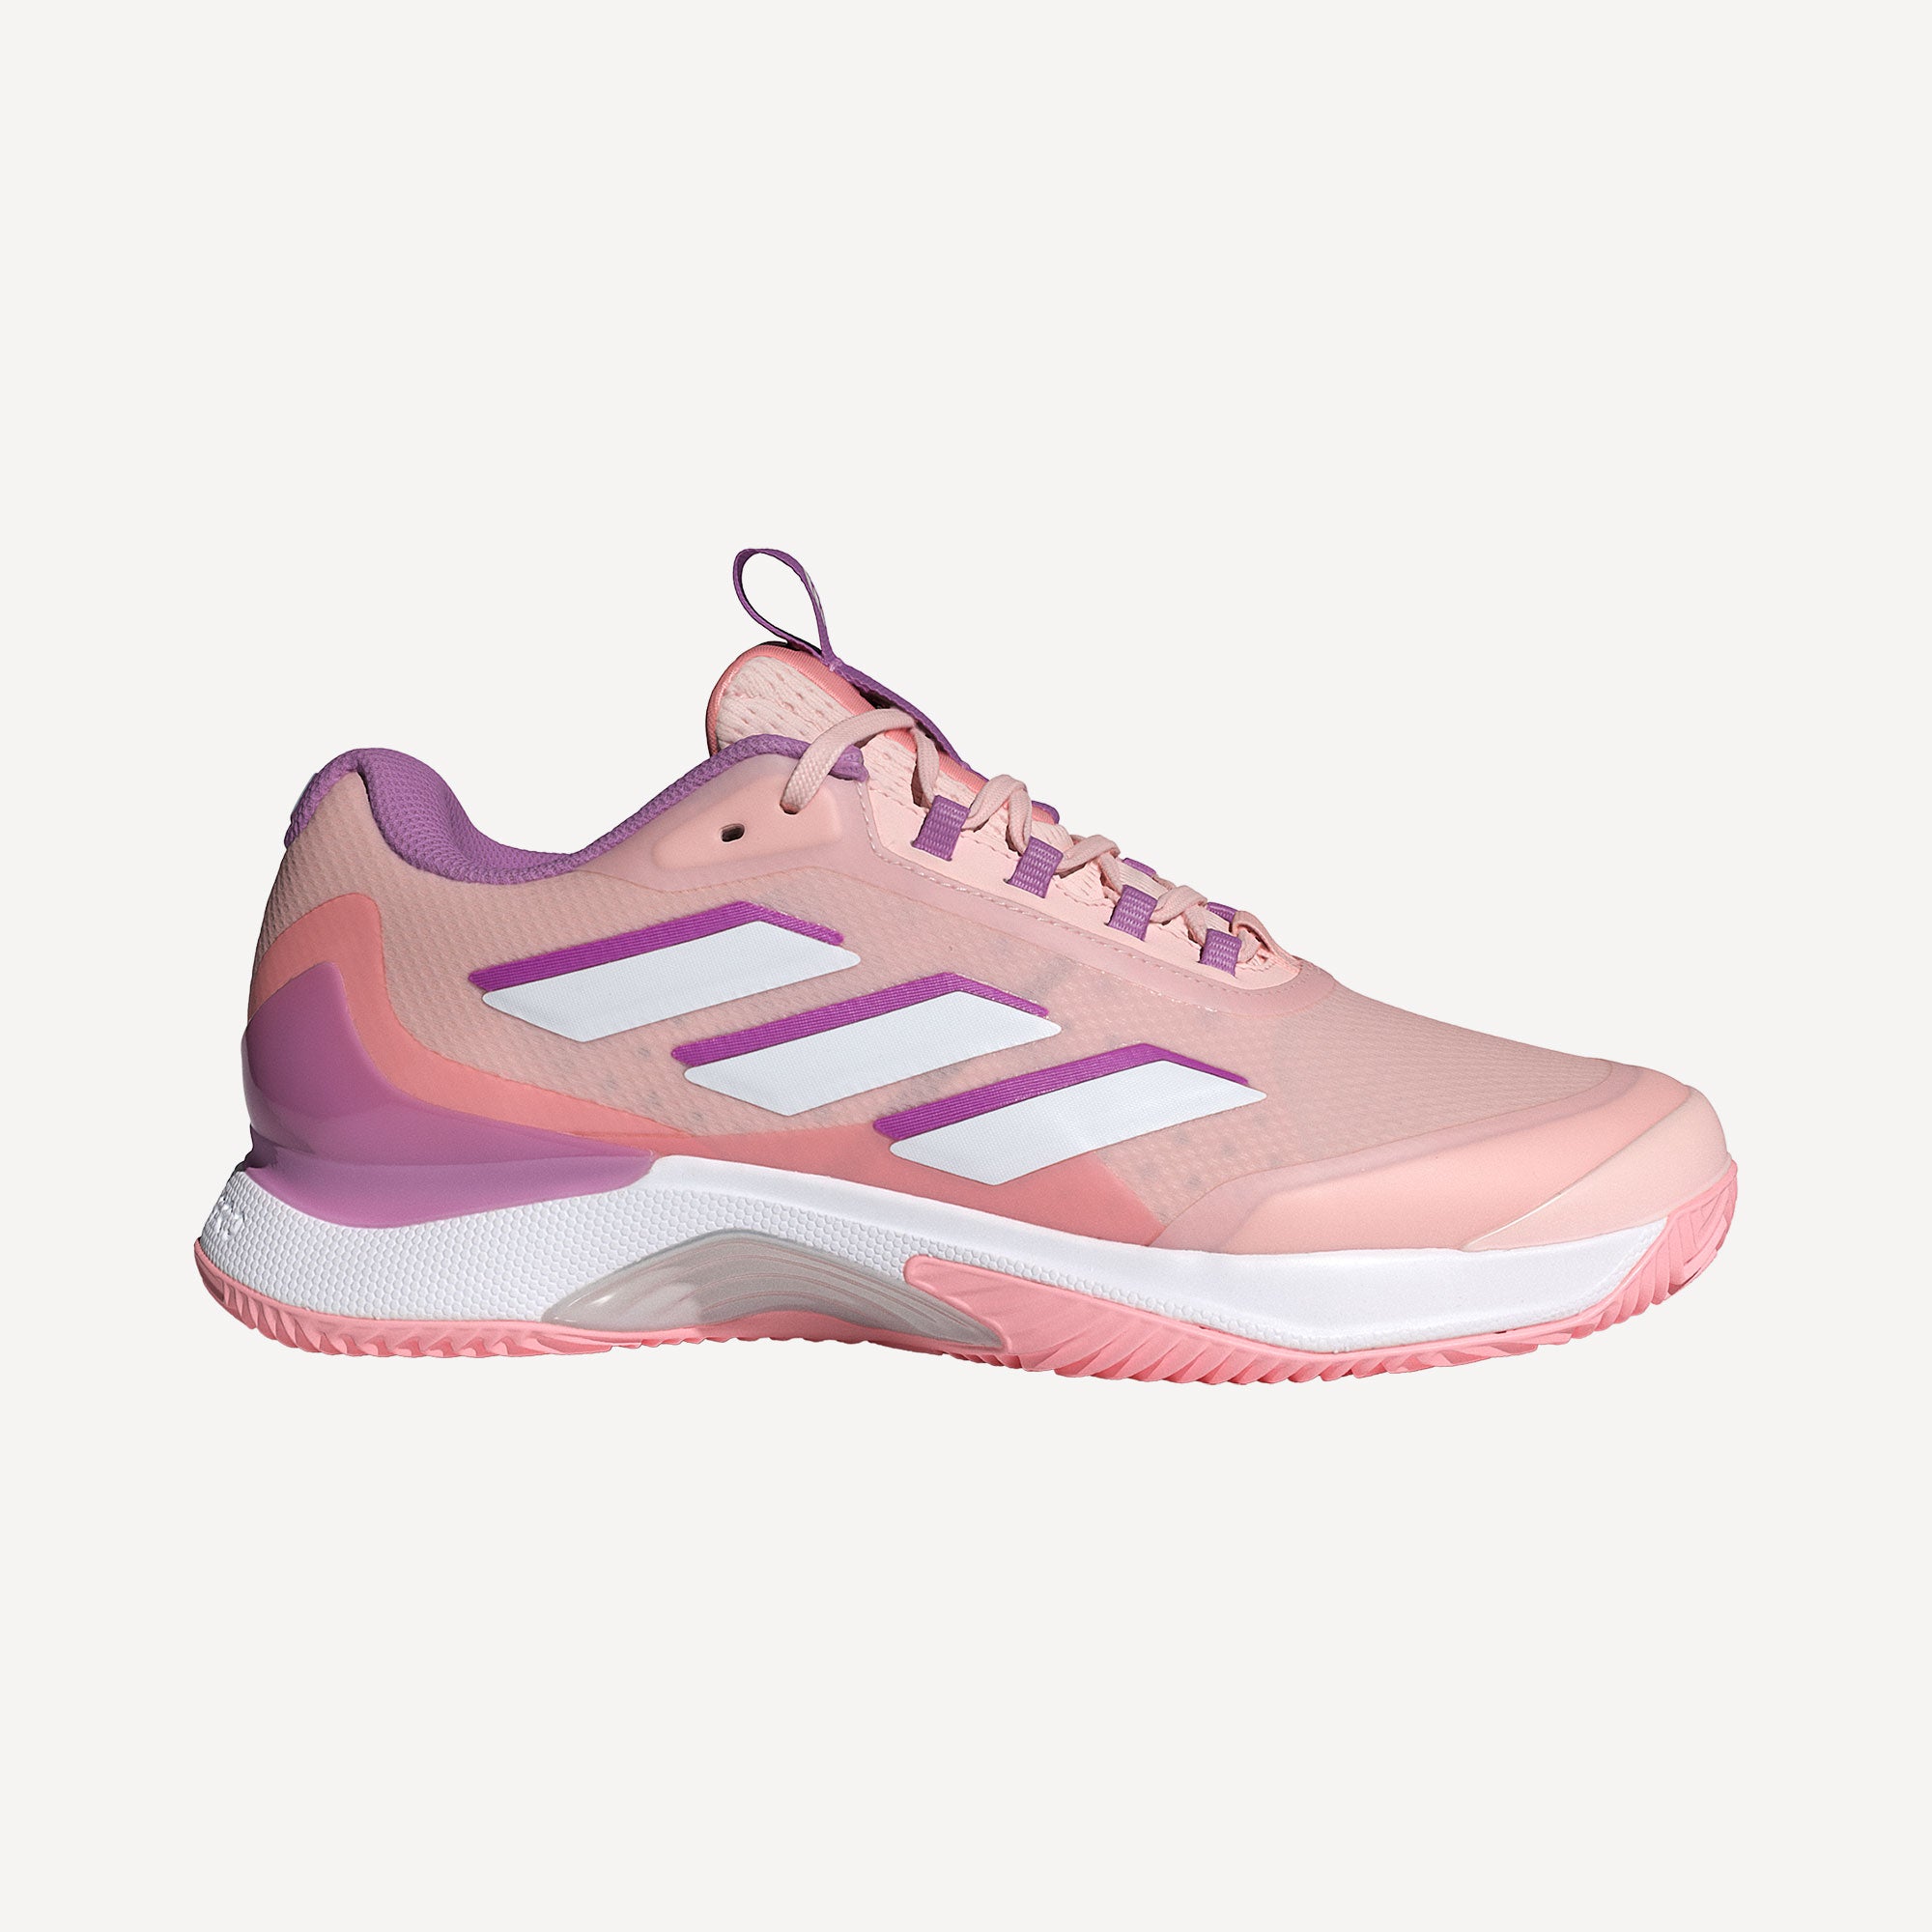 adidas Avacourt 2 Women's Clay Court Tennis Shoes - Pink (1)